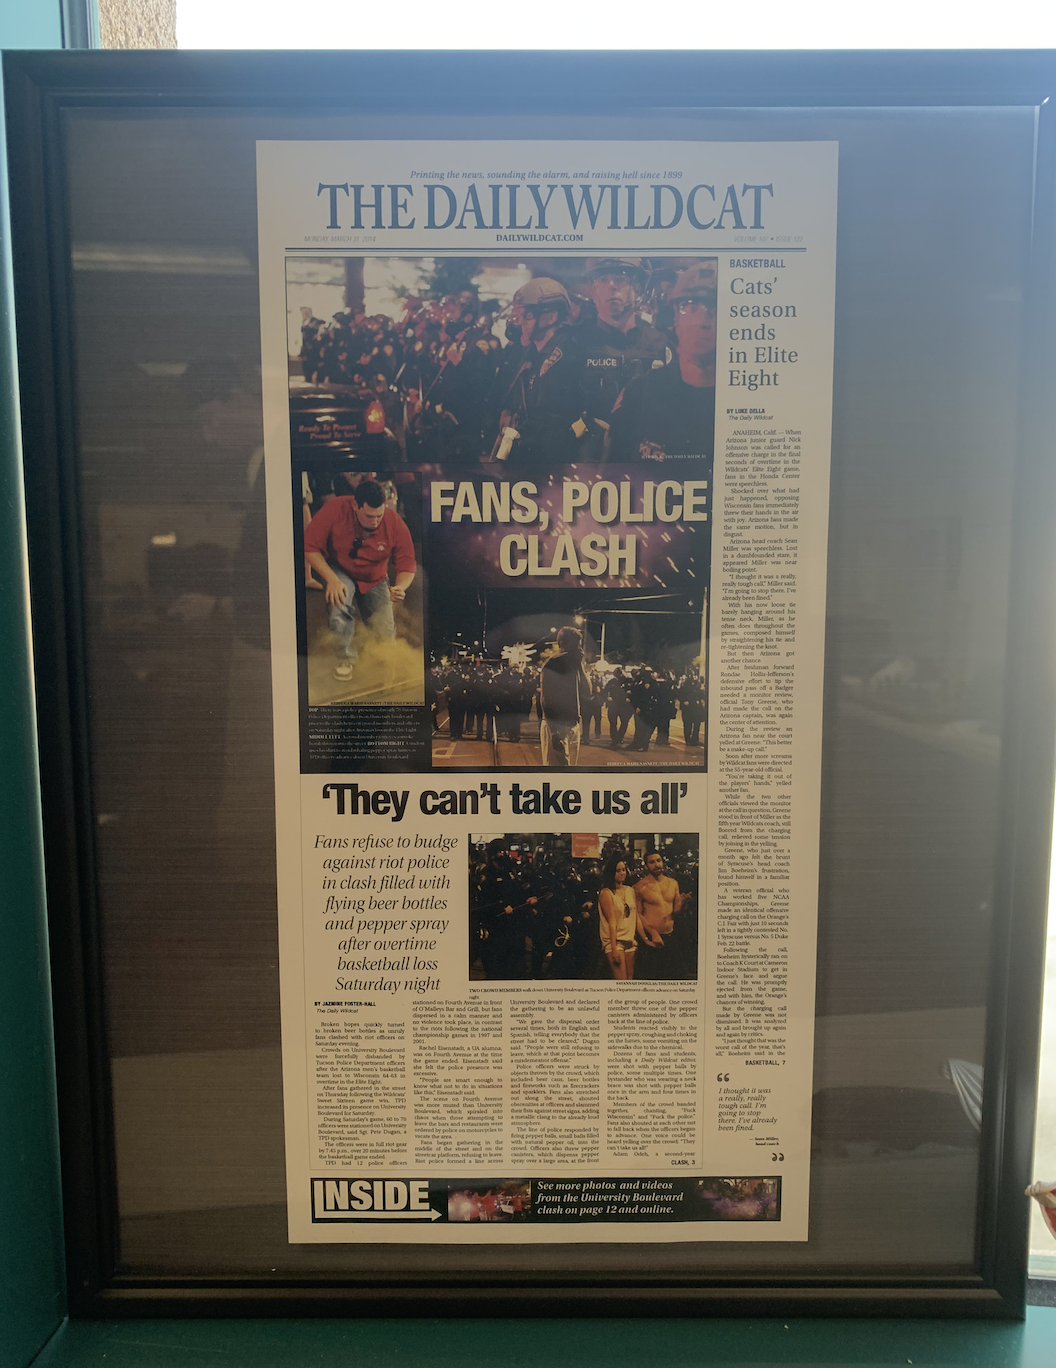 The front page of the Daily Wildcat on March 31, 2014 (volume 107, issue 122). The issue features coverage of the riots that occurred following the Arizona men's basketball team's loss in the Elite Eight to Wisconsin.